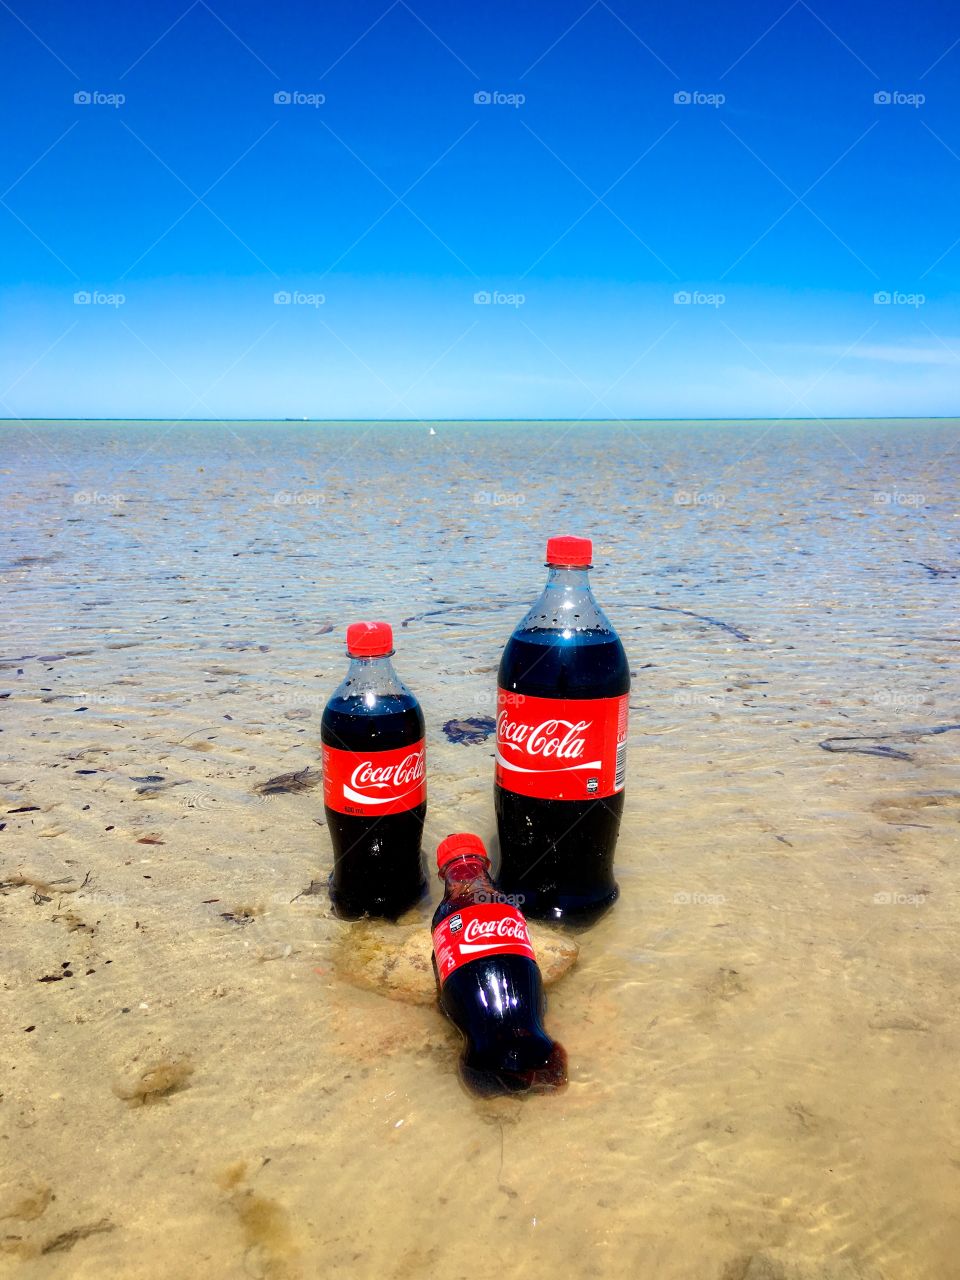 A “family” of three at the beach: represented by the three sizes of Coca Cola. The vivid red labels work well against the tropical blue and the Beach is one of the best places I know of to quench my thirst with Coke!